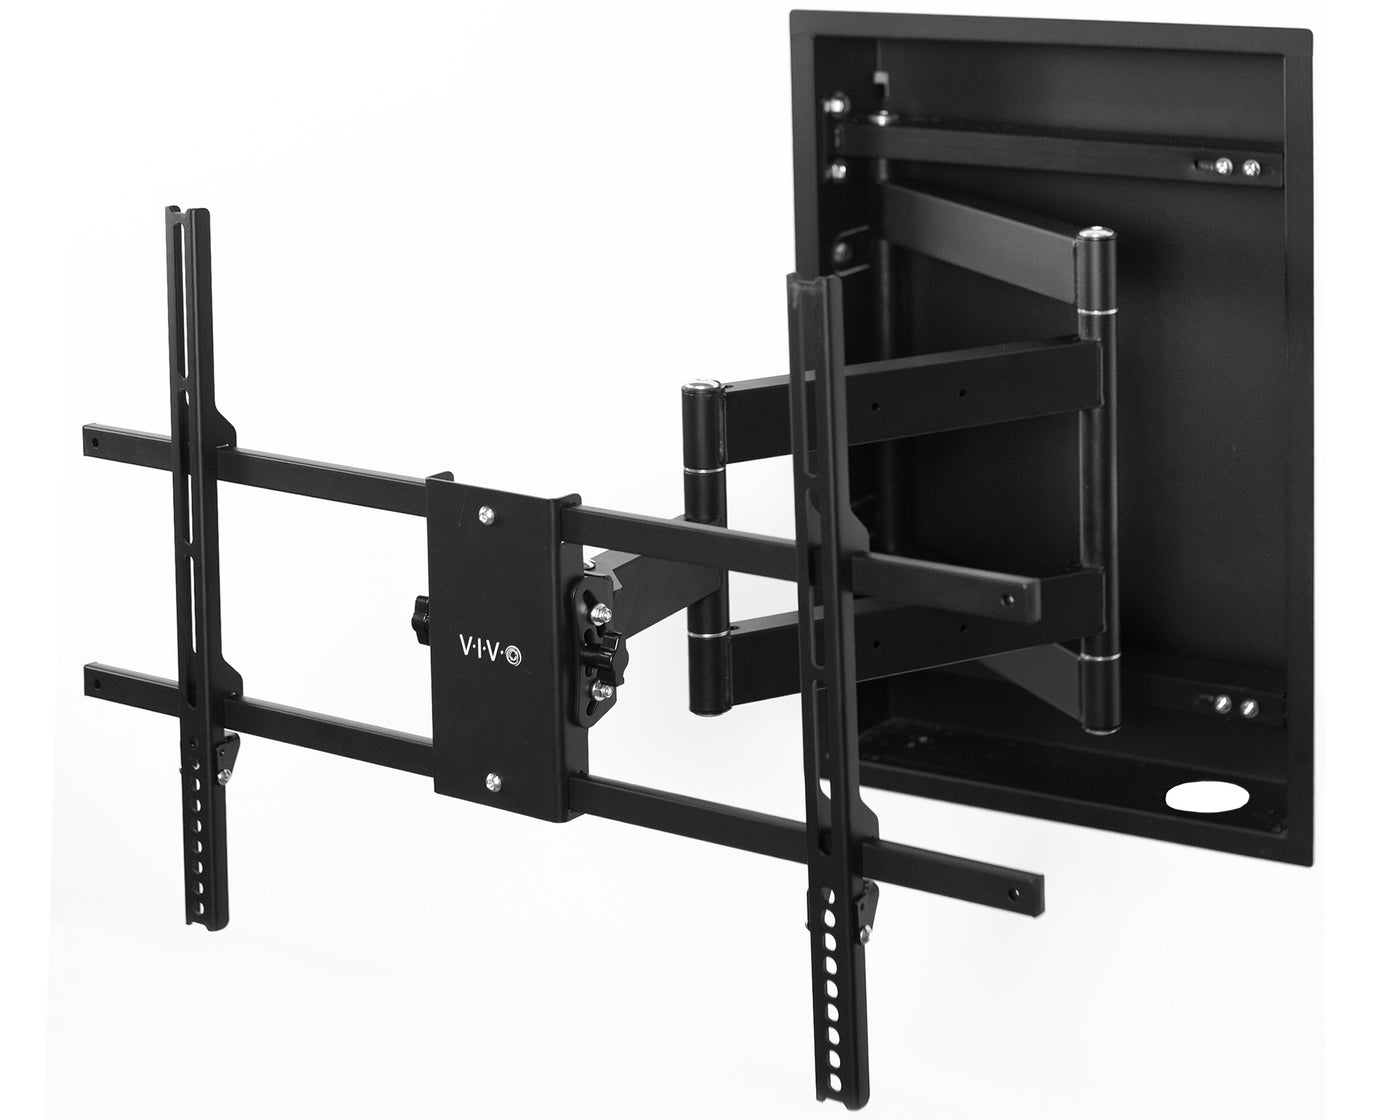 Fully articulating LED or LCD TV wall mount.